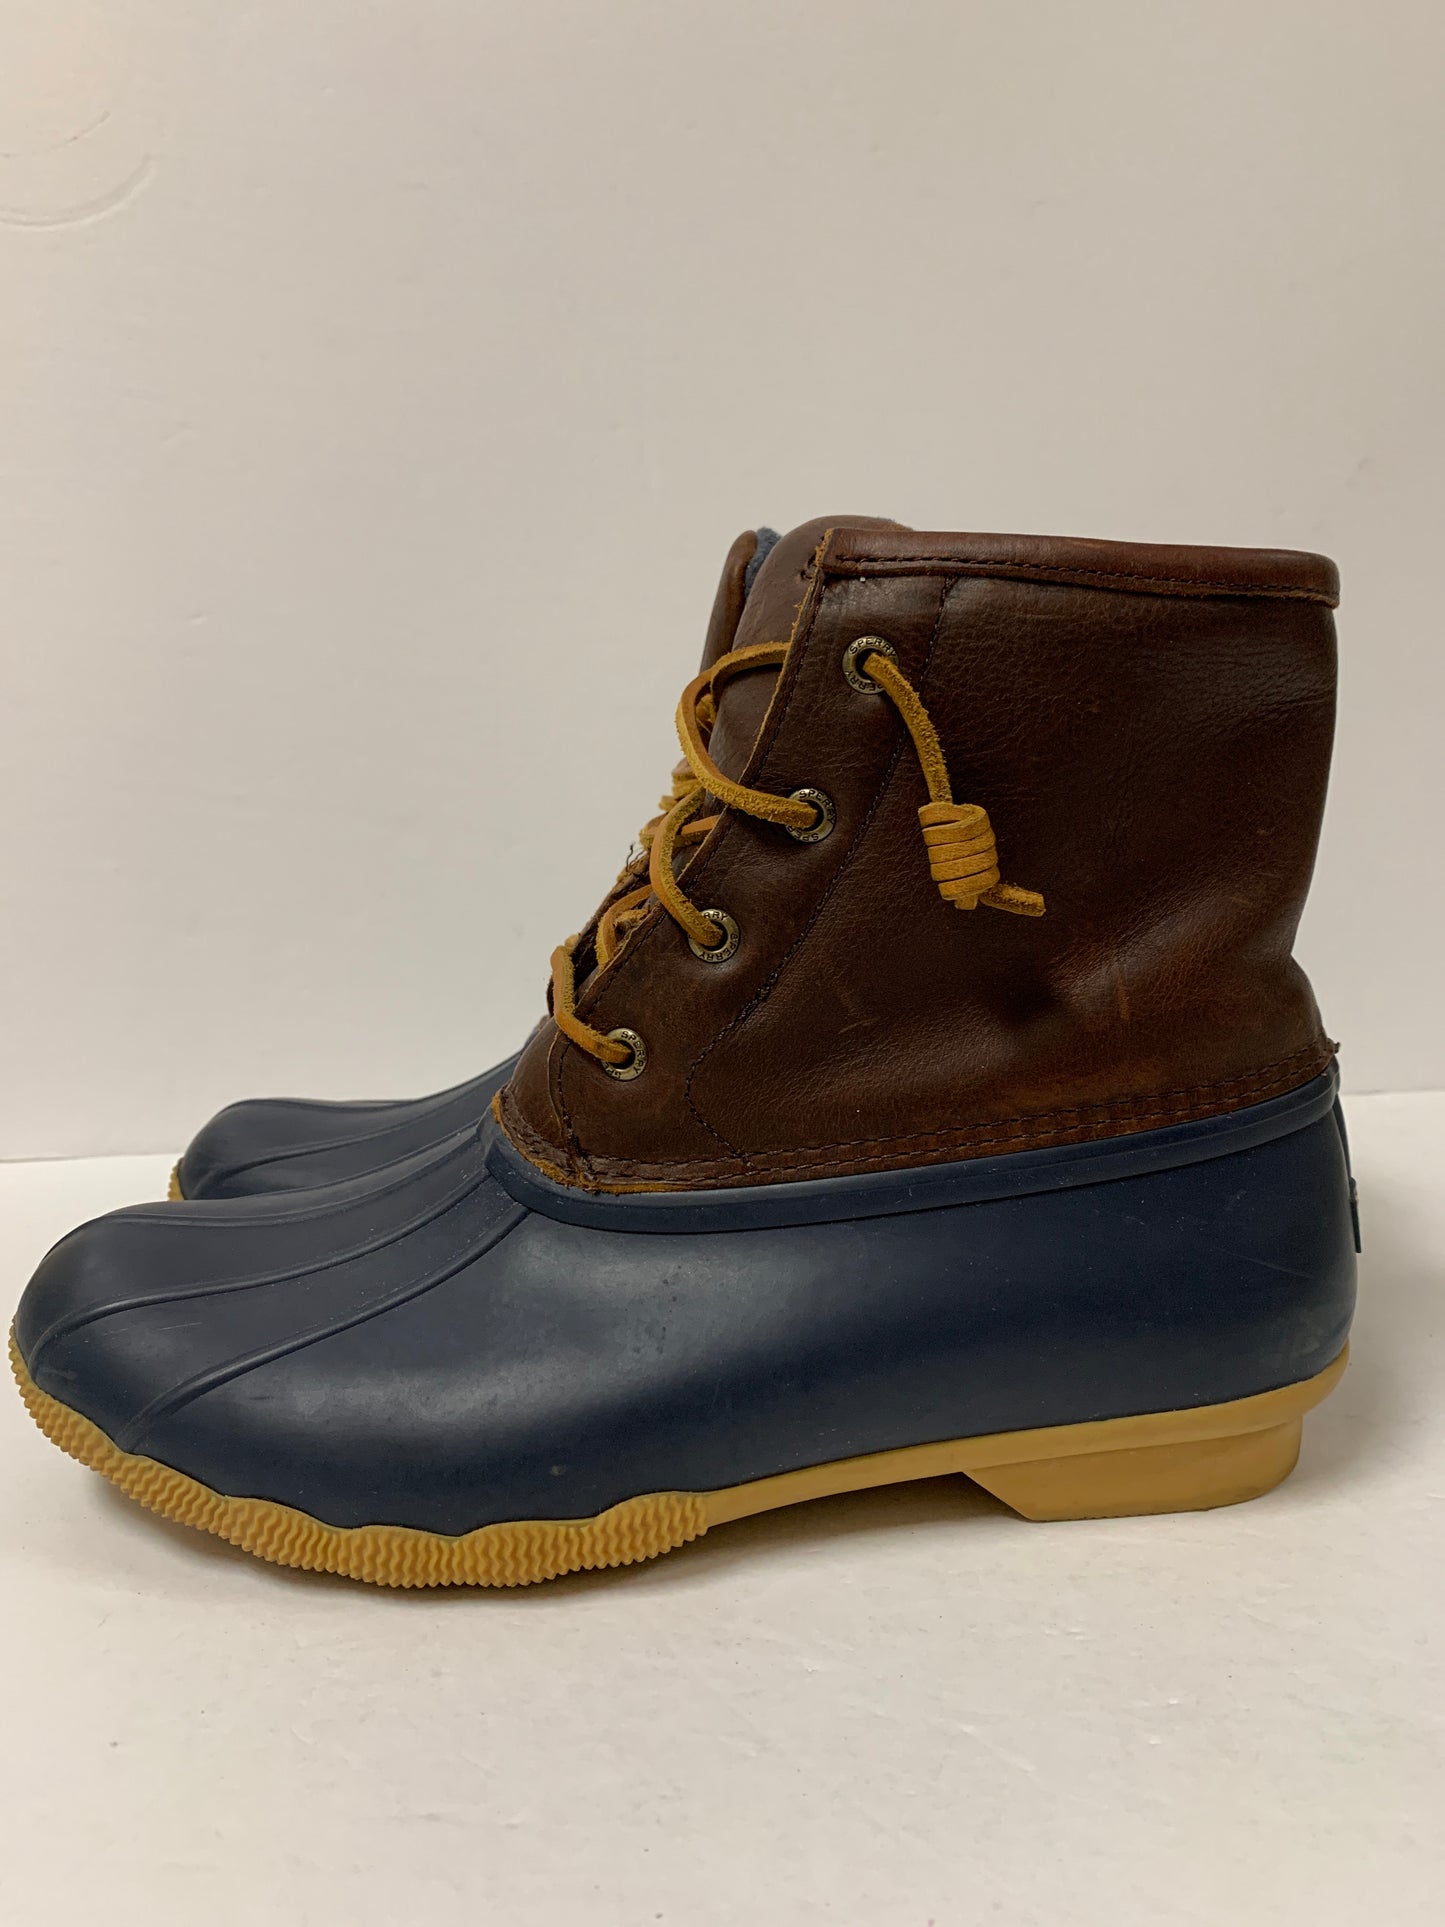 Boots Rain By Sperry  Size: 9